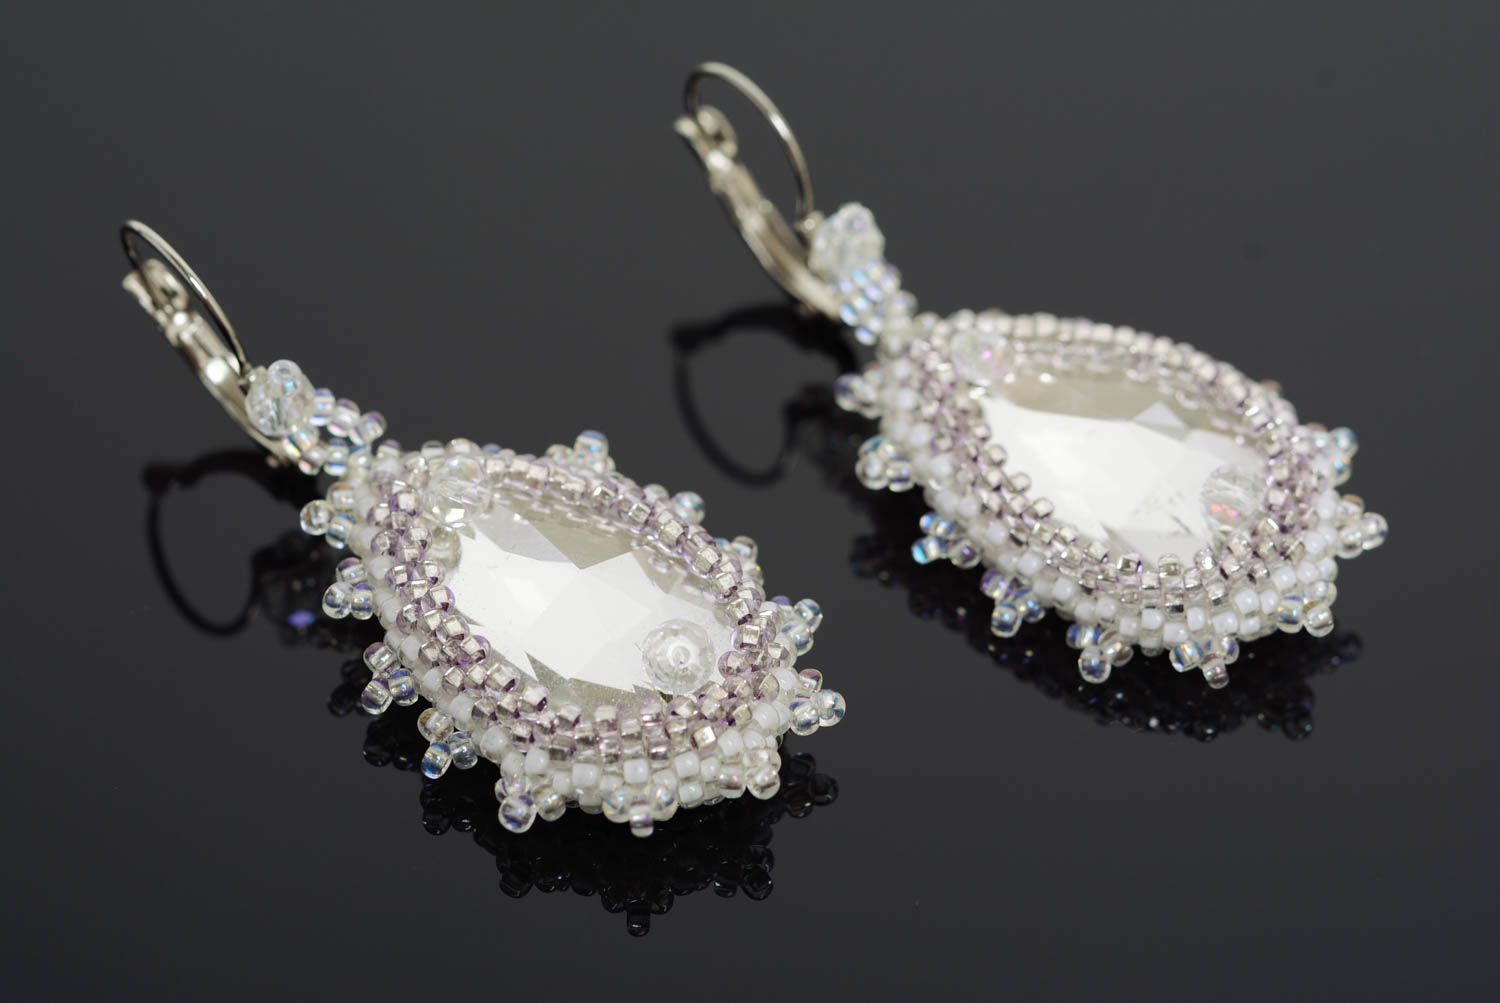 Handmade teardrop beaded earrings with Austrian crystals and English fasteners photo 1